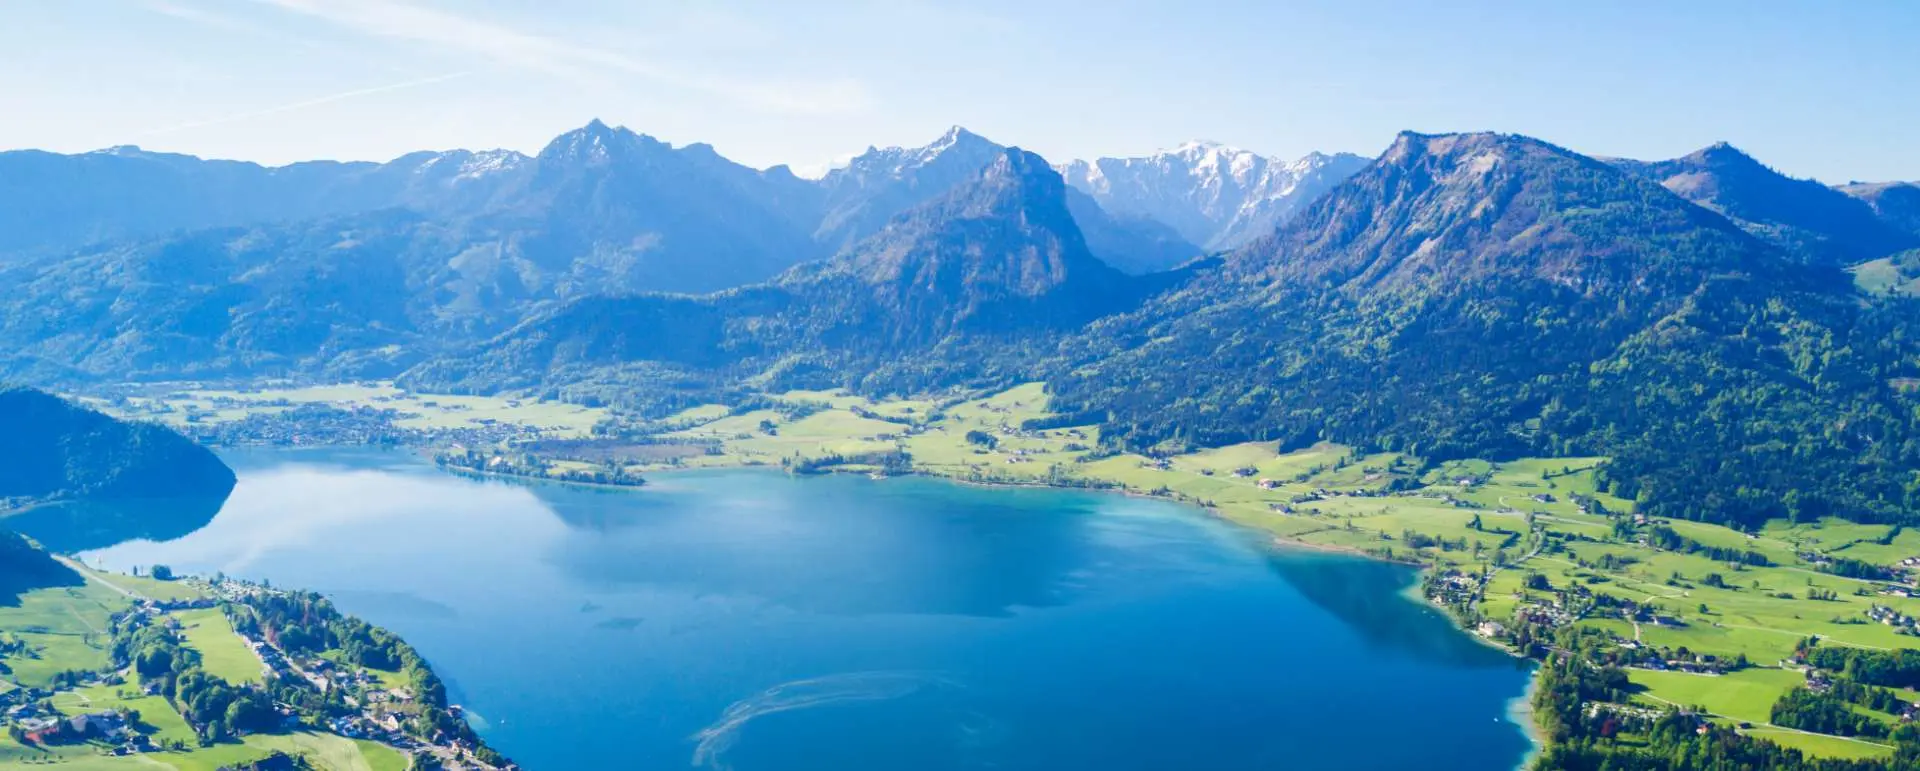 Wolfgangsee Lake - the destination for sports teams